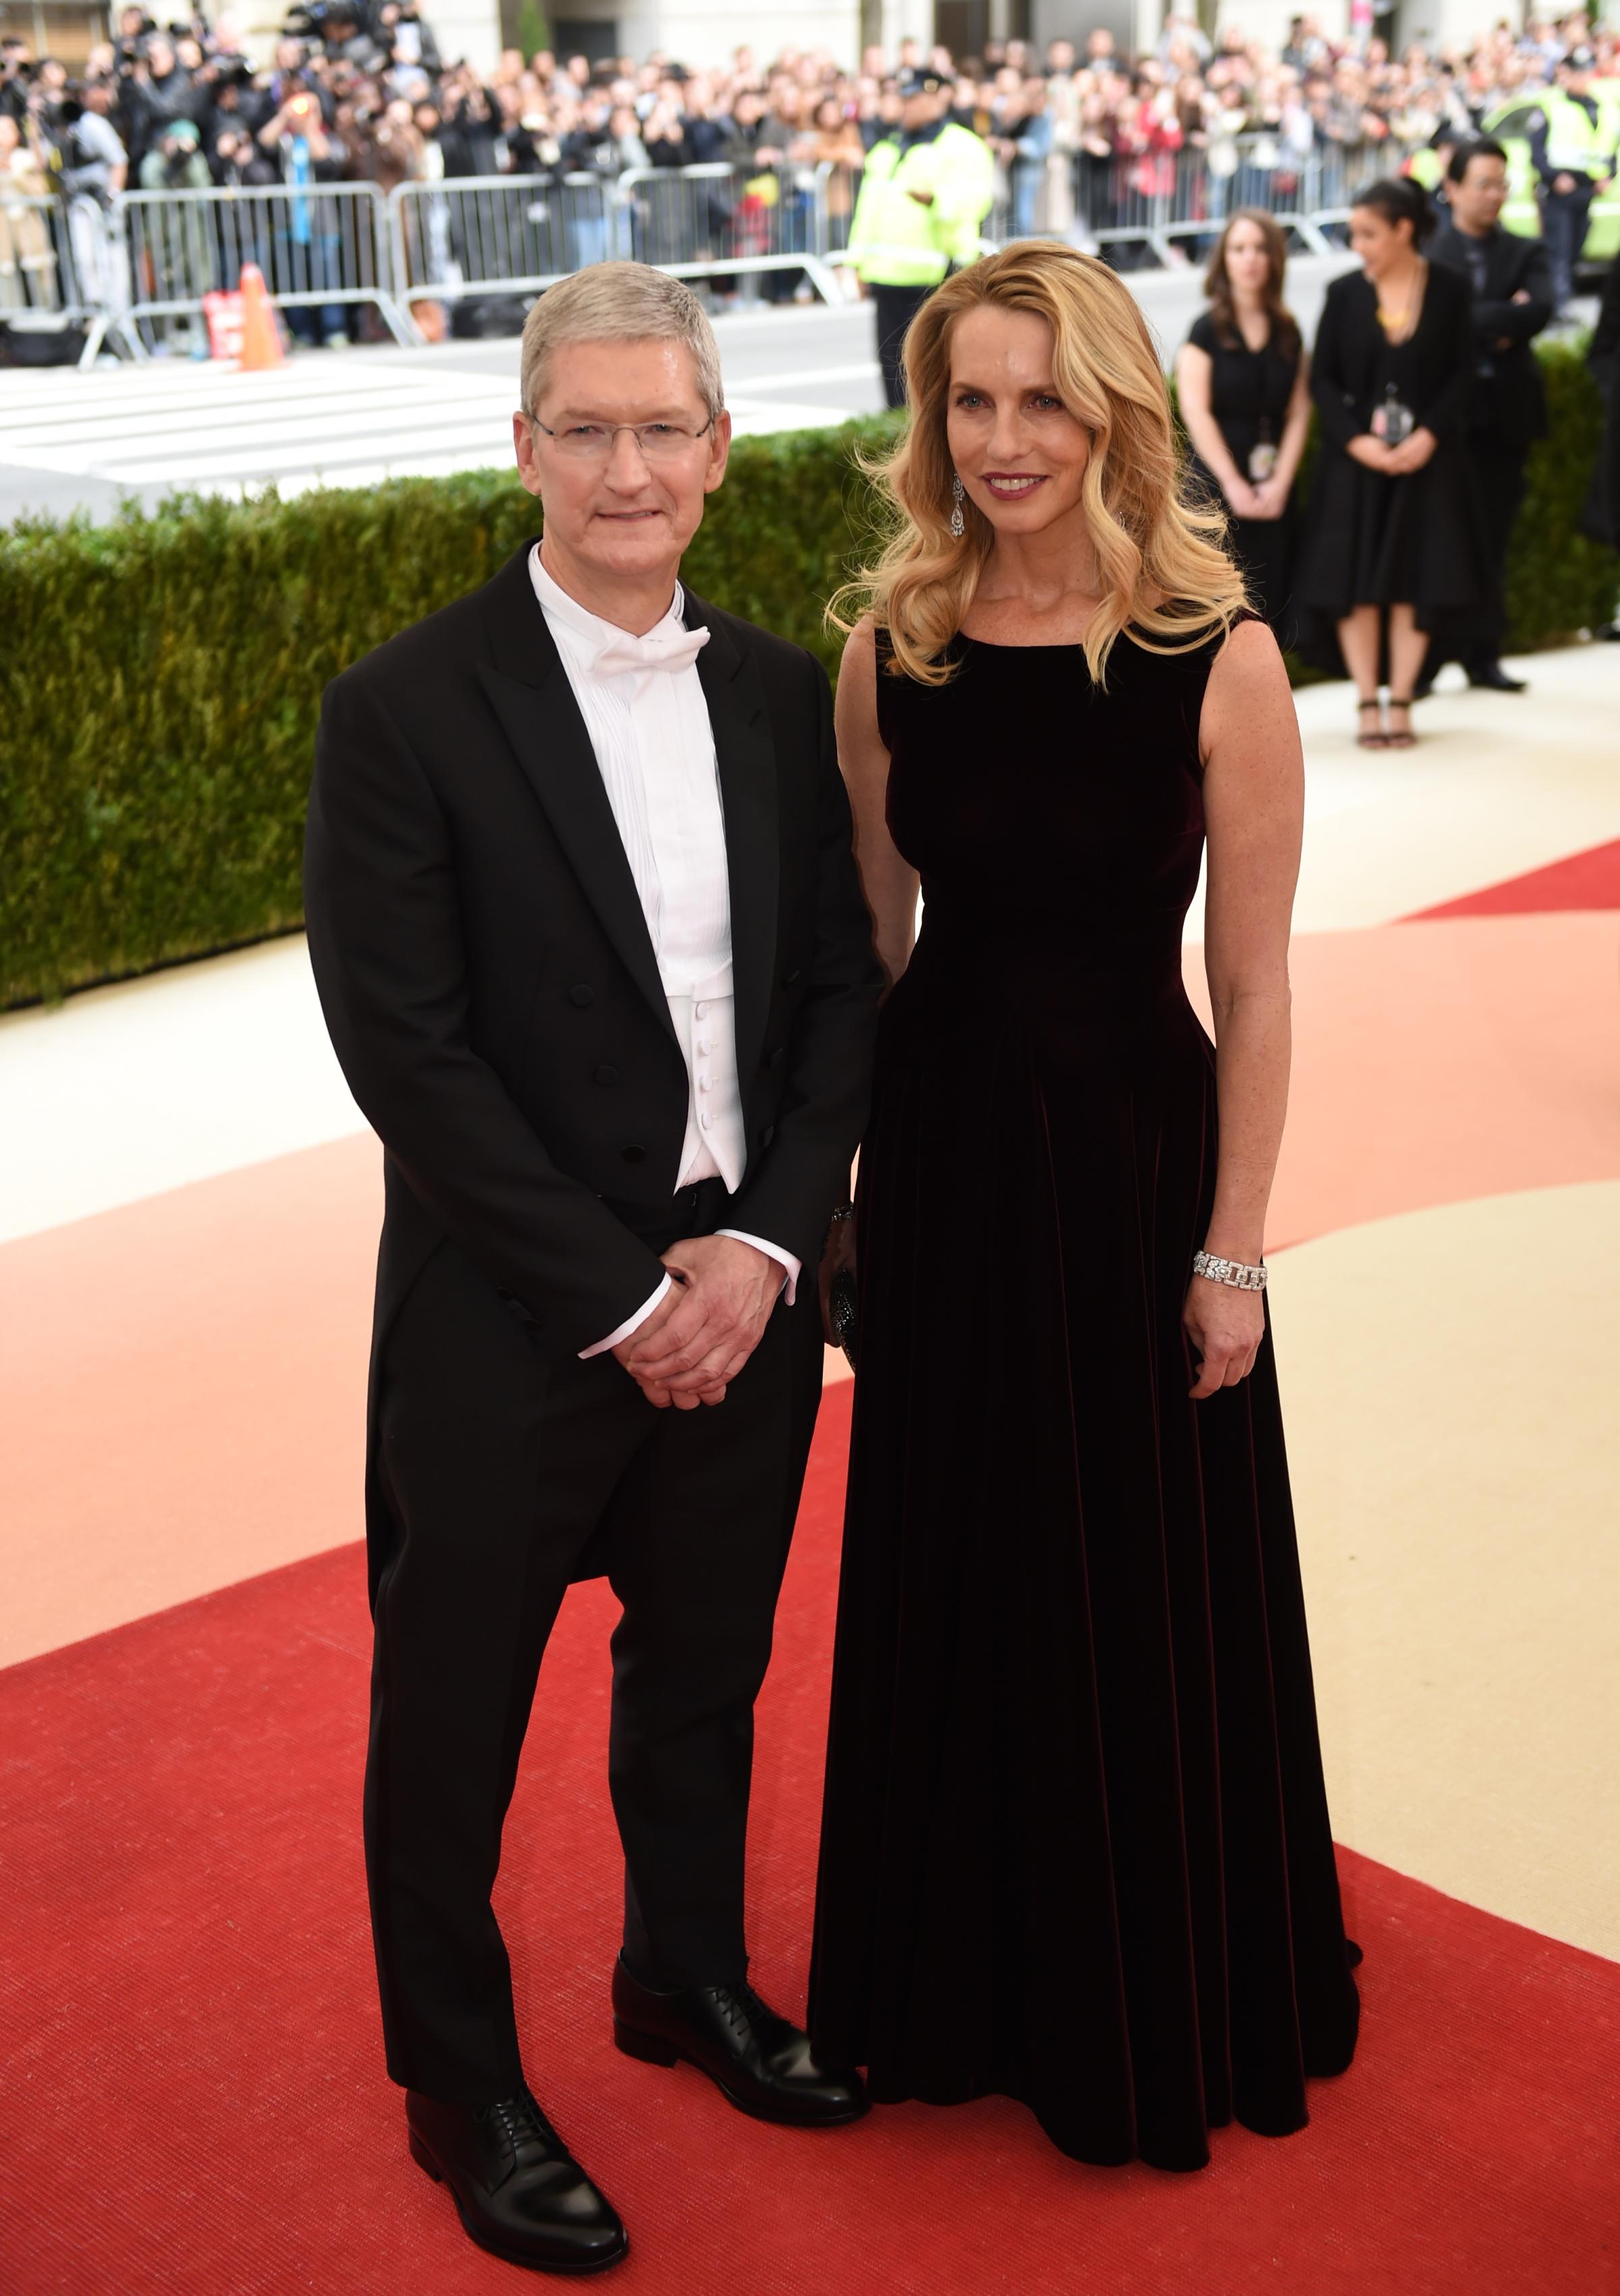 Tim Cook and guest attend "Manus x Machina: Fashion In An Age Of Technology" Costume Institute Gala at Metropolitan Museum of Art on May 2, 2016 in New York City.